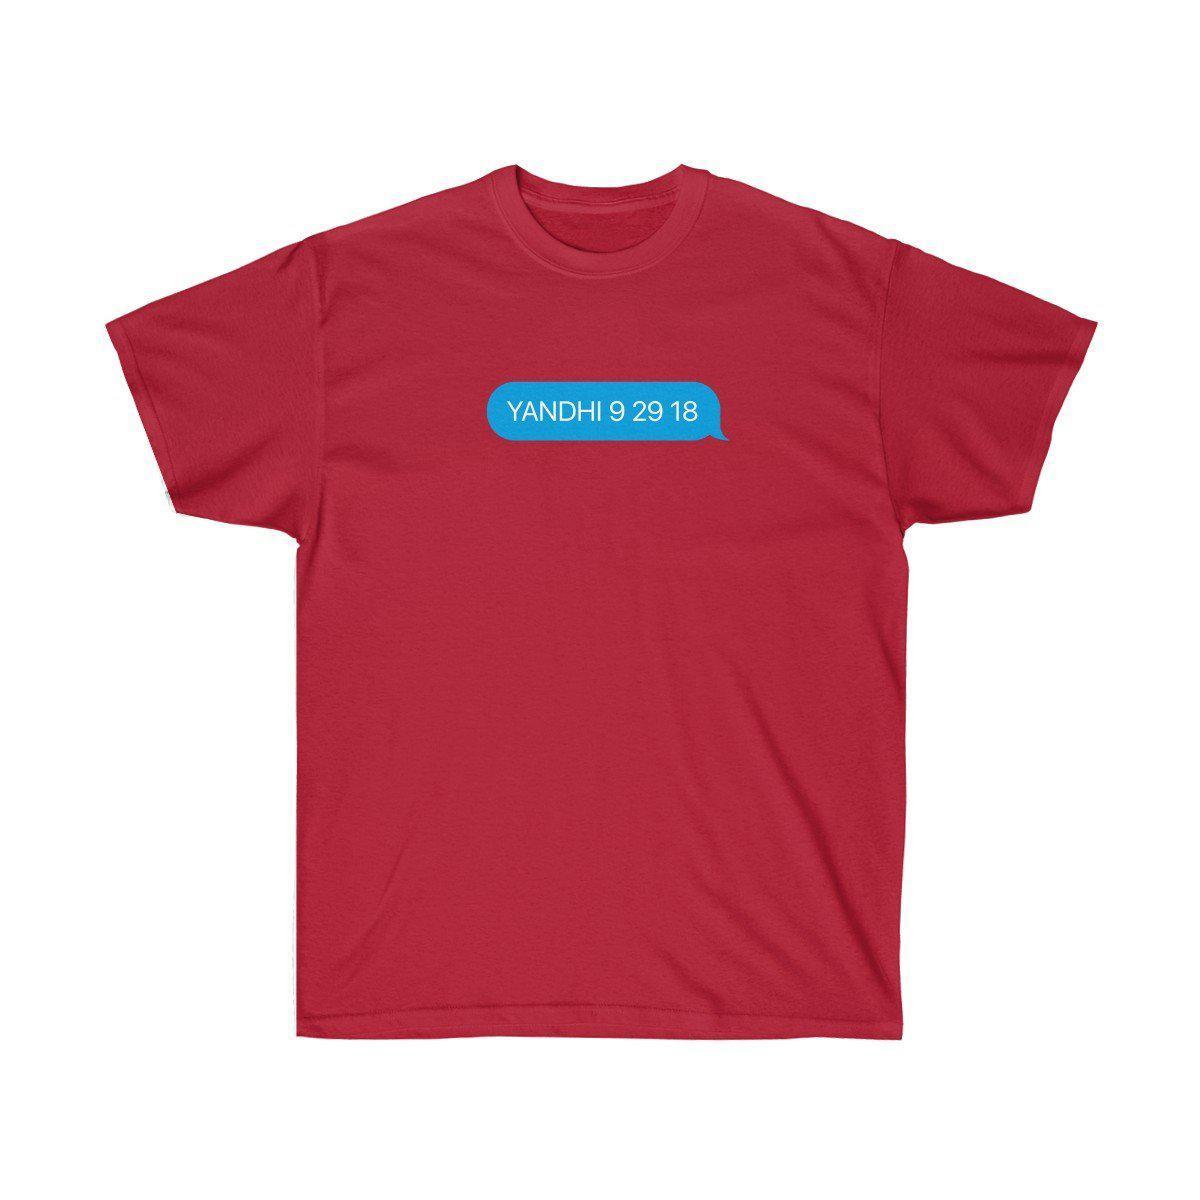 YANDHI 9 29 18 Kanye West iMessage Inspired Tee-Cardinal Red-S-Archethype